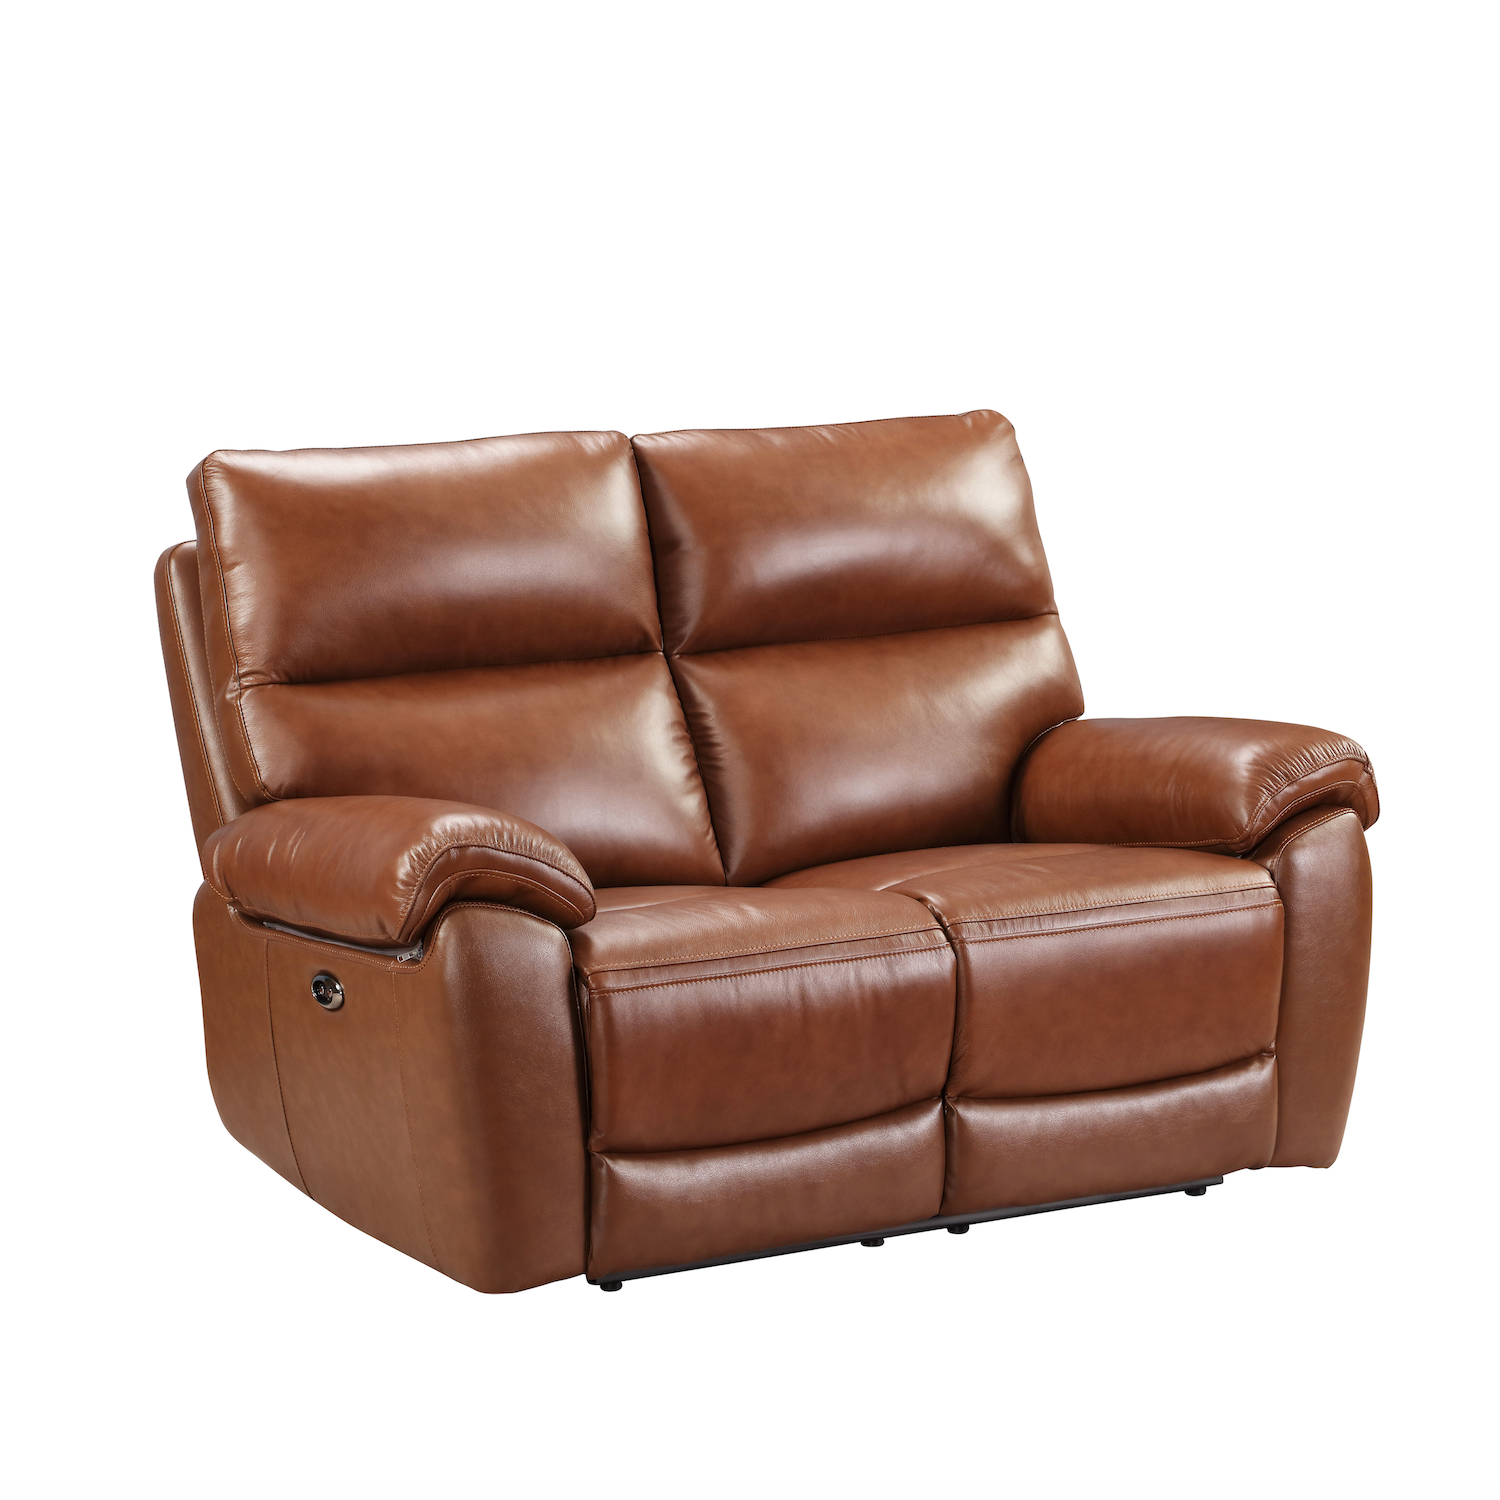 Rocco 2 Seater Static Sofa Chestnut Leather